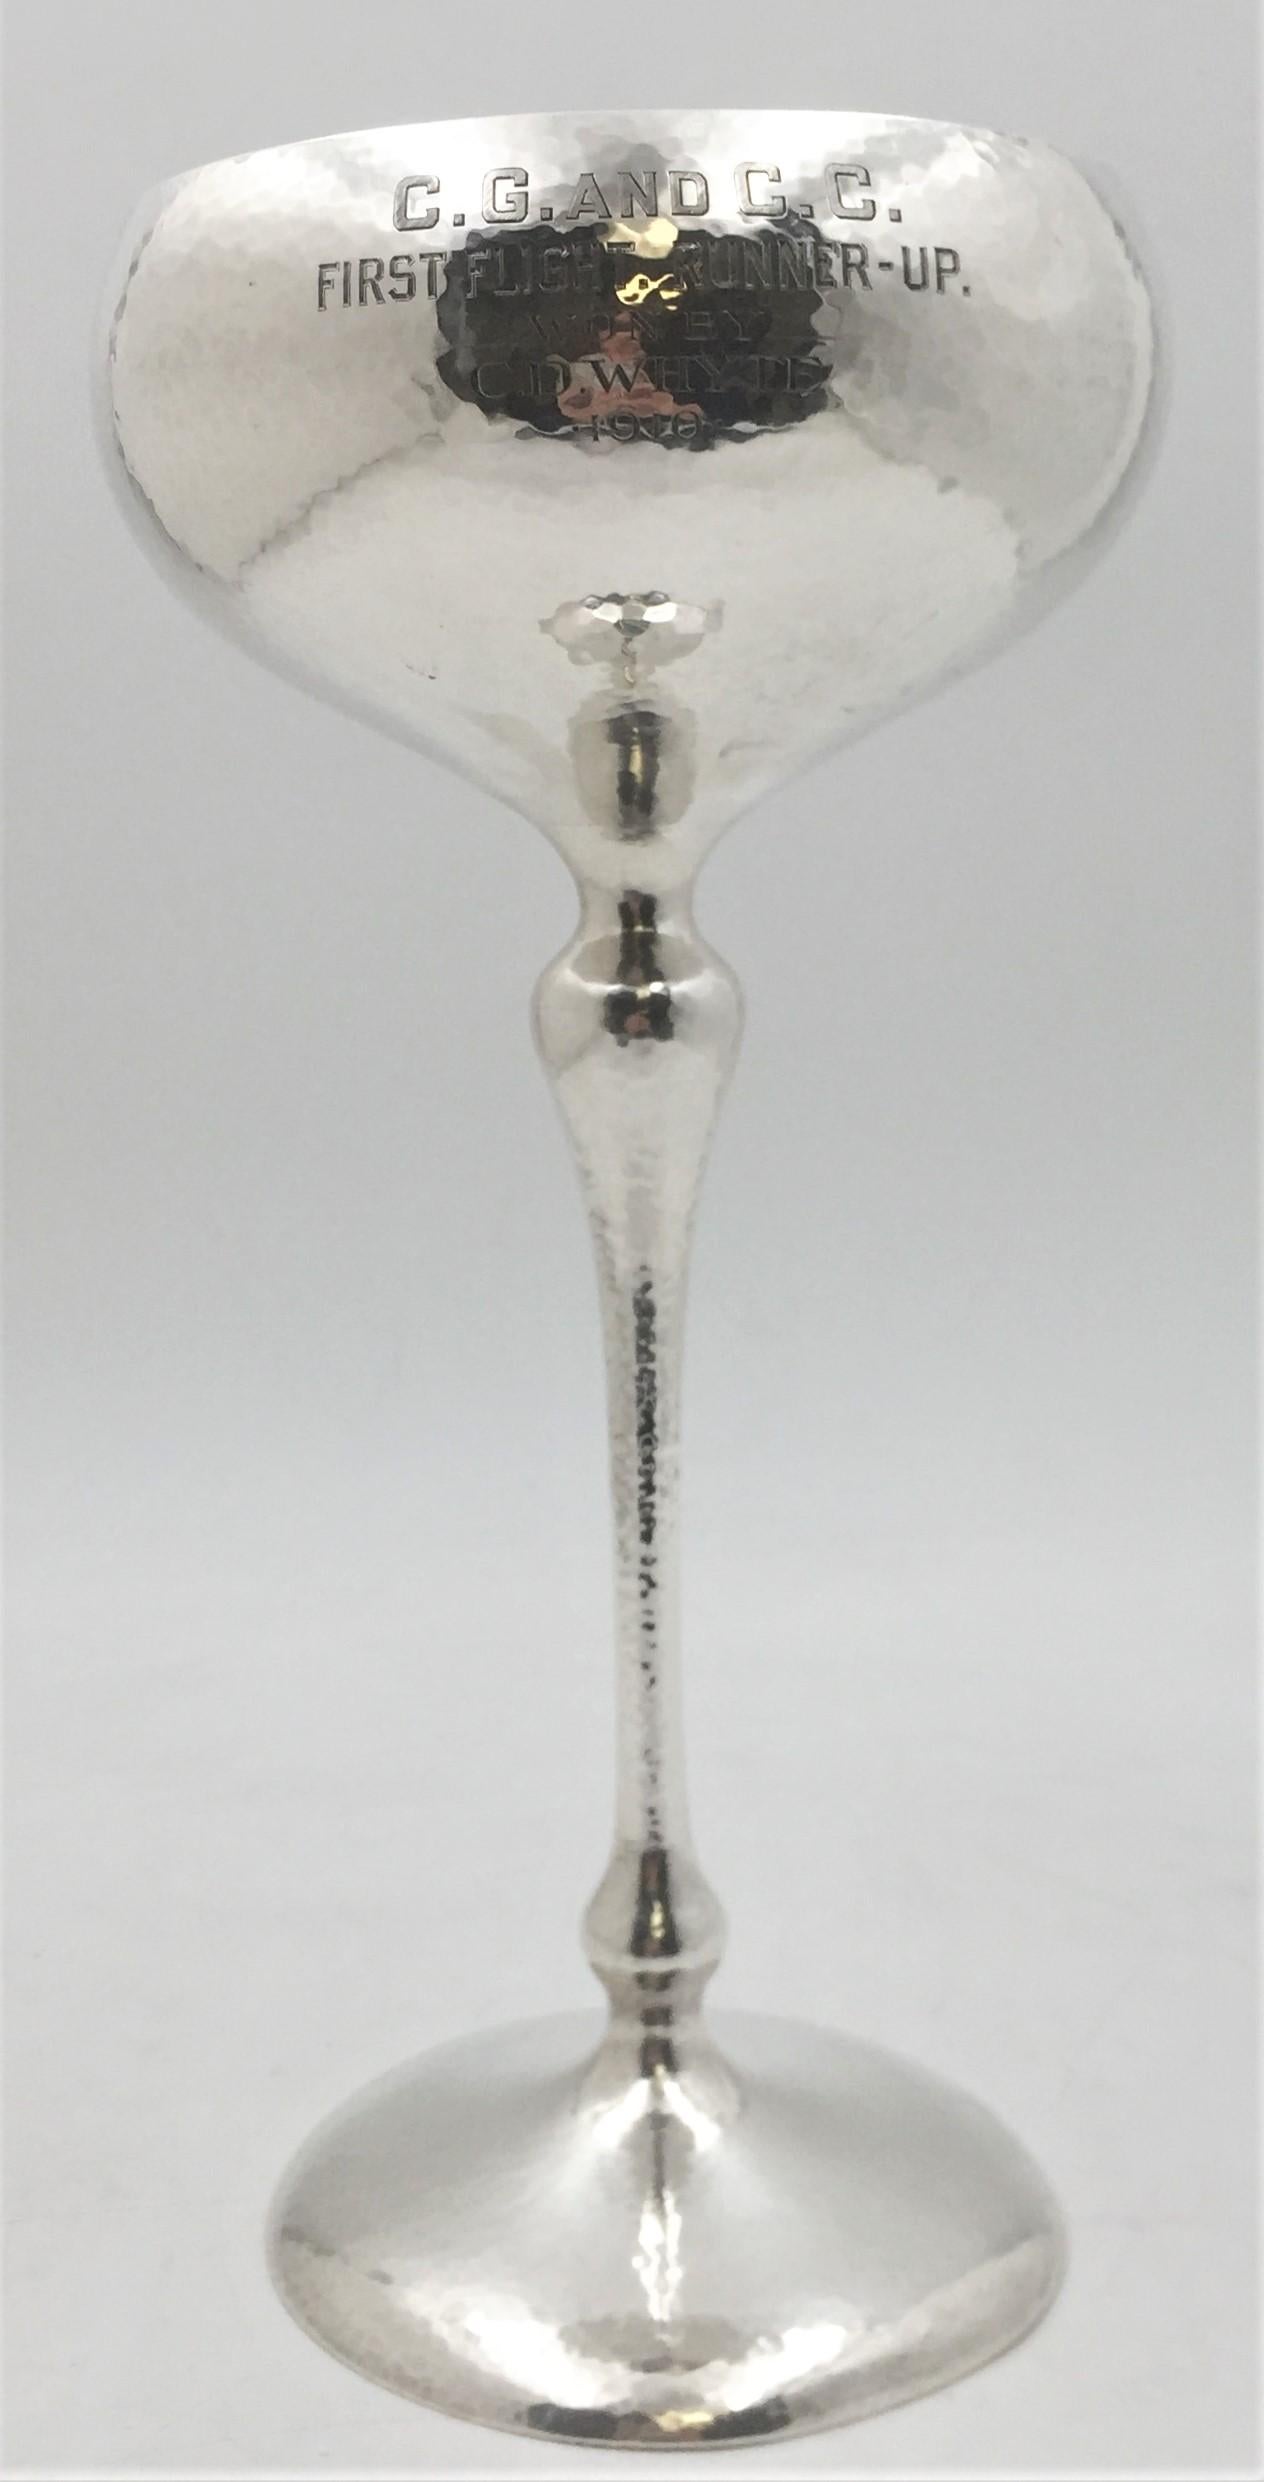 Shreve & Co. large sterling silver goblet / trophy with a tall stem, designed with a hand hammered finish in exquisite Art Deco style. It measures 11.5 inches tall and 5.3 inches wide at top, weighs 20 troy ounces (gross weight; loaded base), and